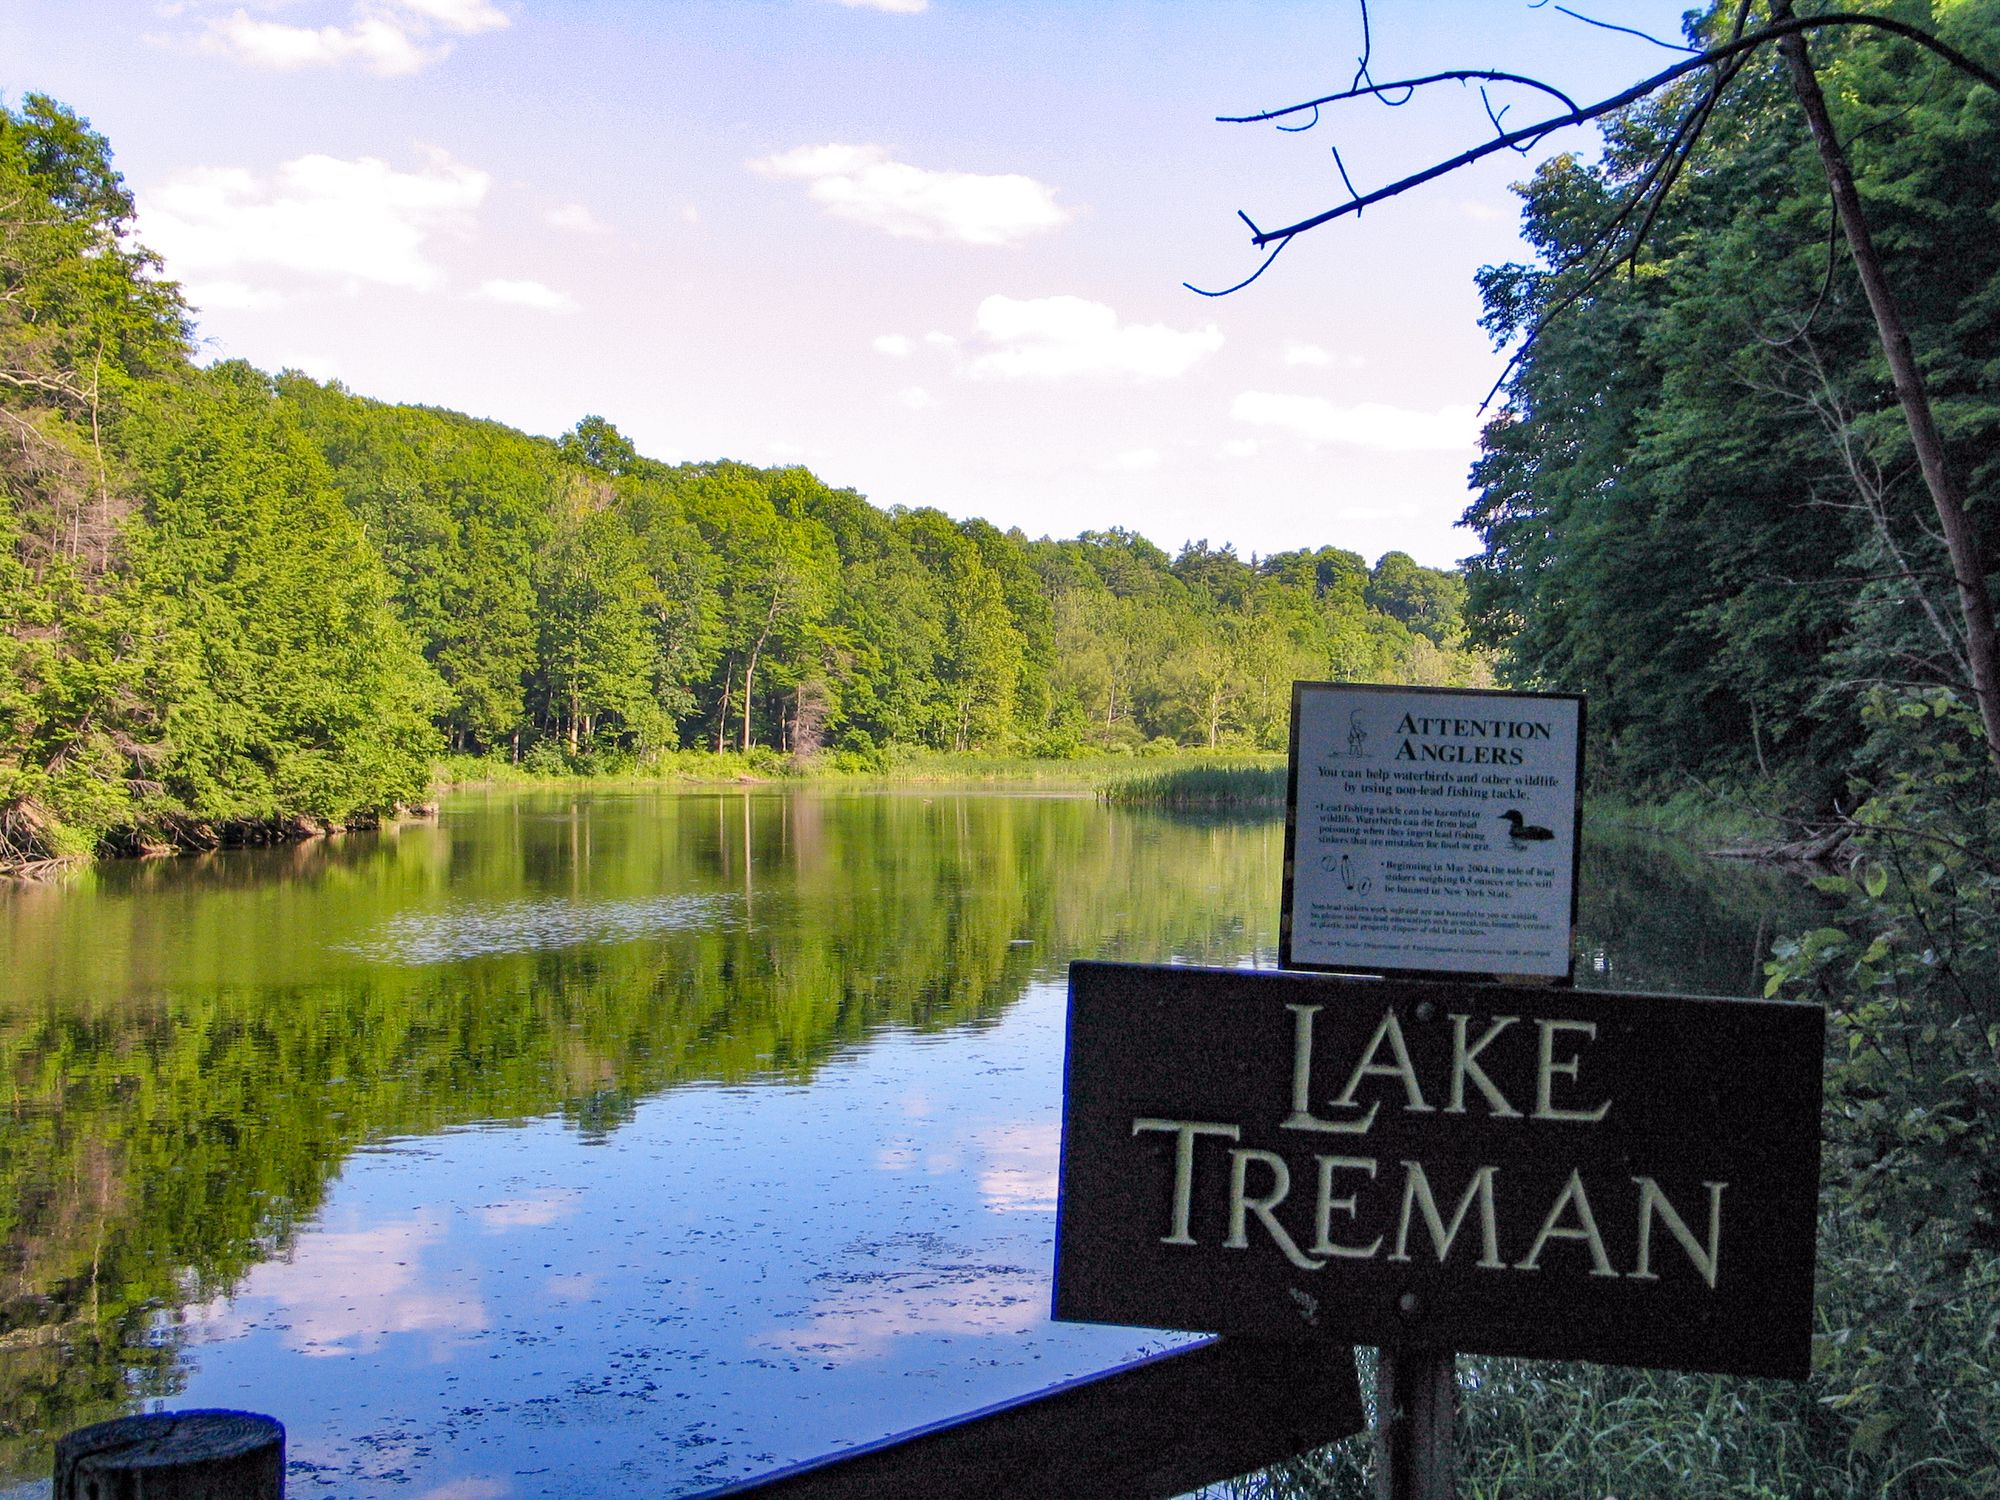 Lake Treman, Buttermilk Falls State Park on a Sunny Day